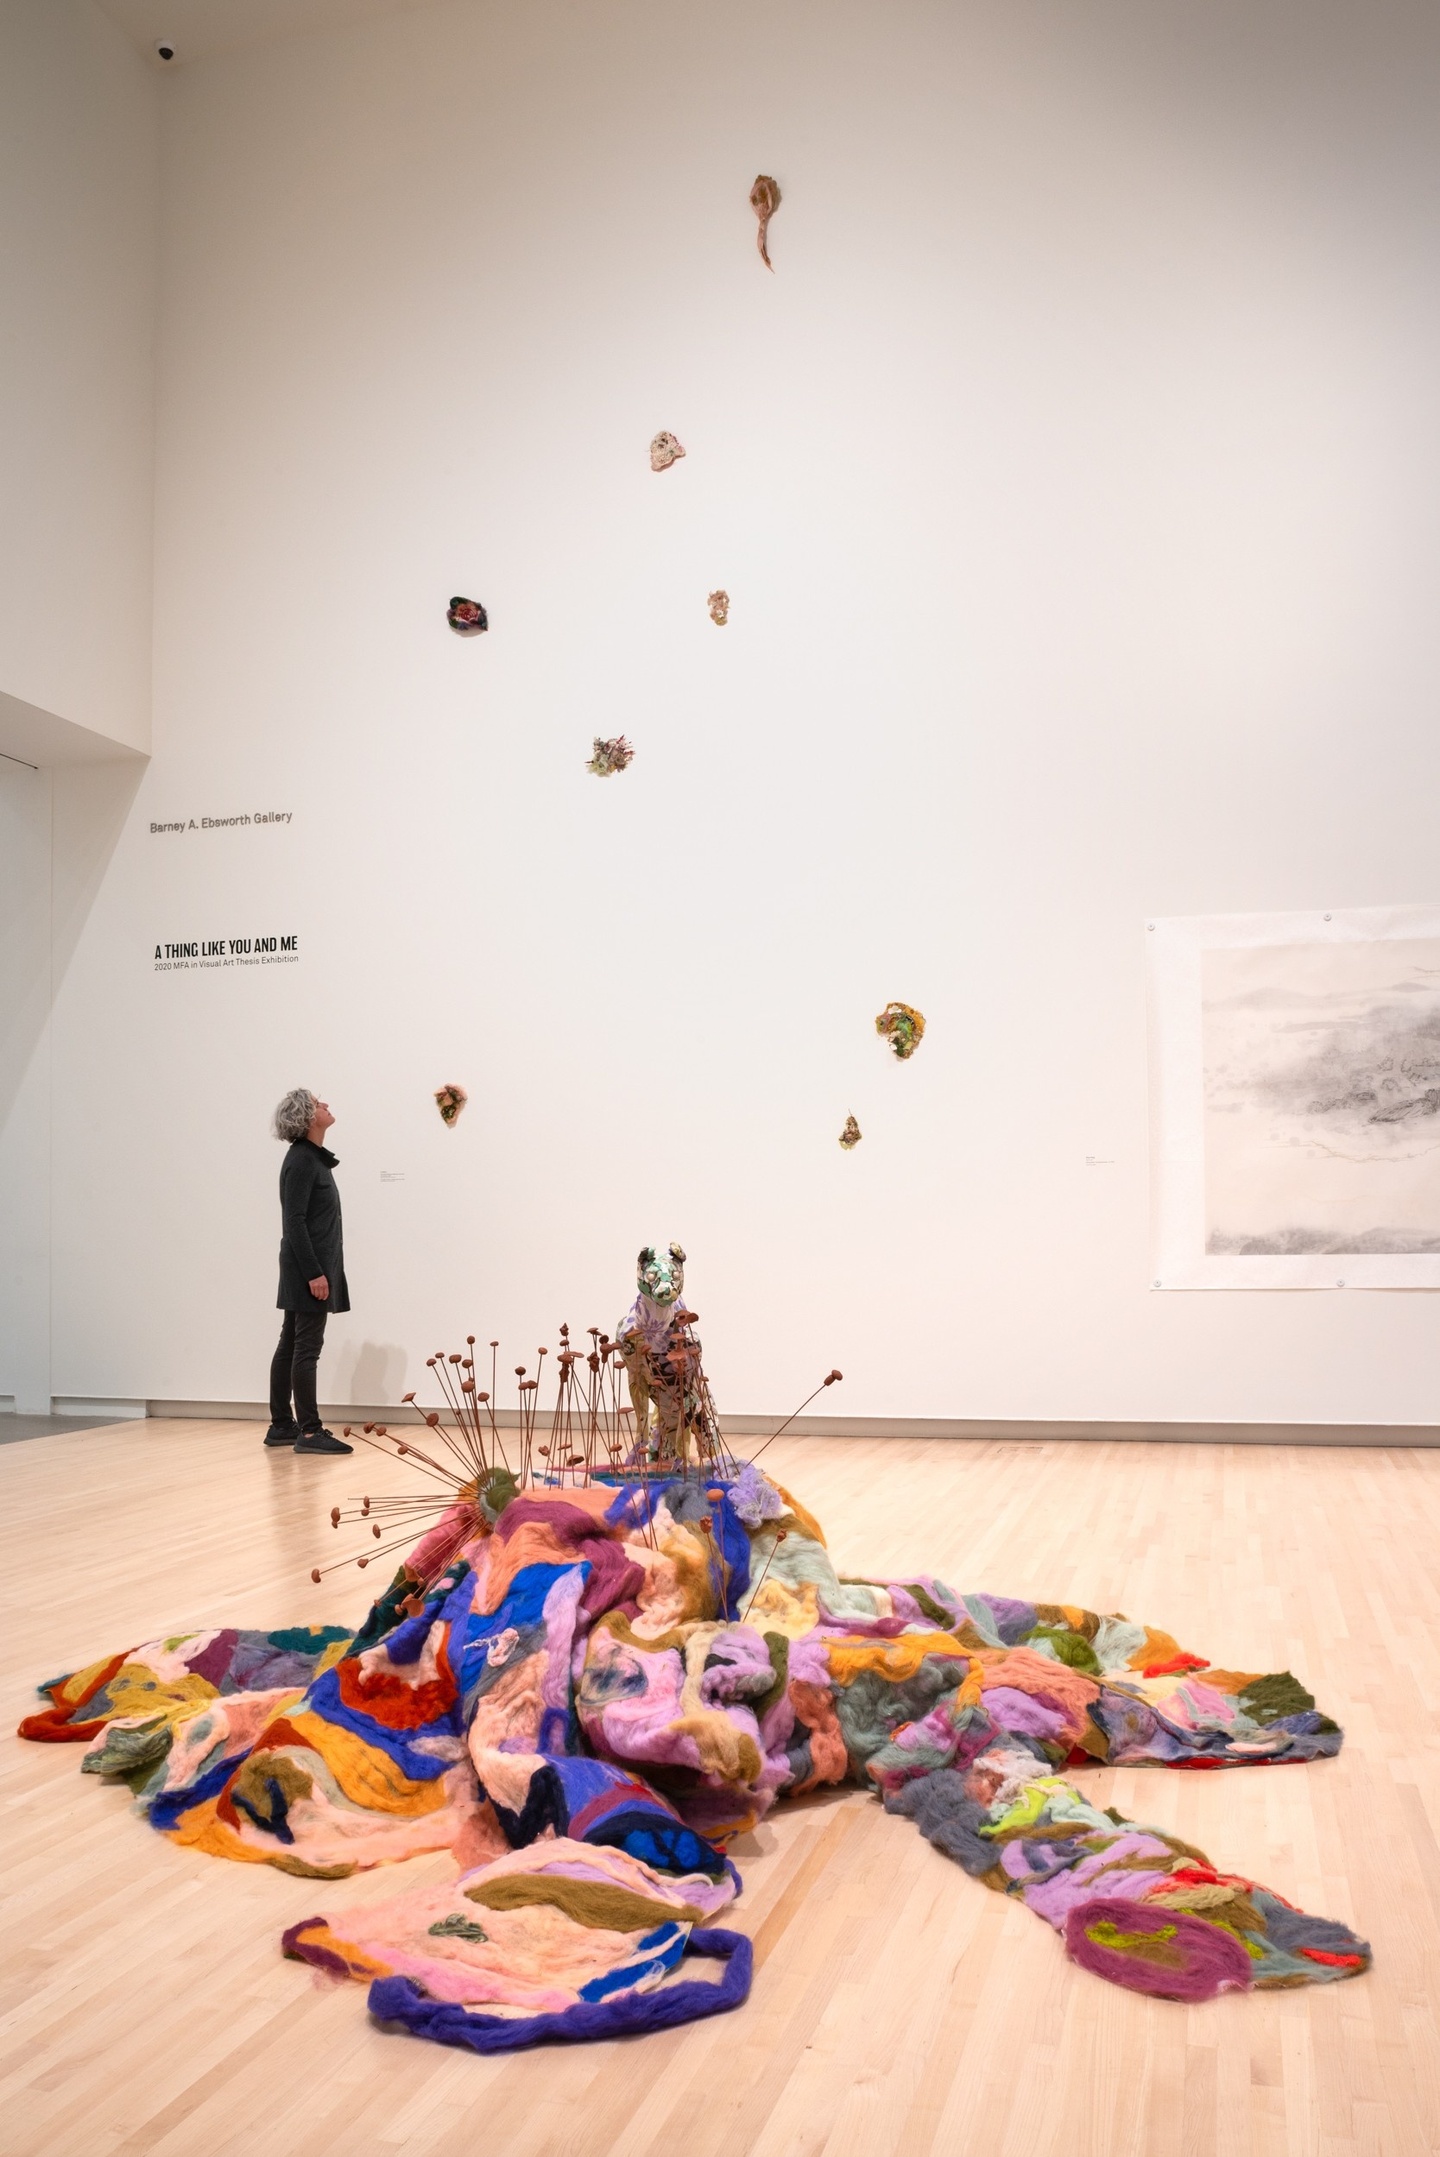 A large multi-colored felt sculpture on the gallery floor. Wires poke out of it like mushrooms and a multi-colored animal perches above it